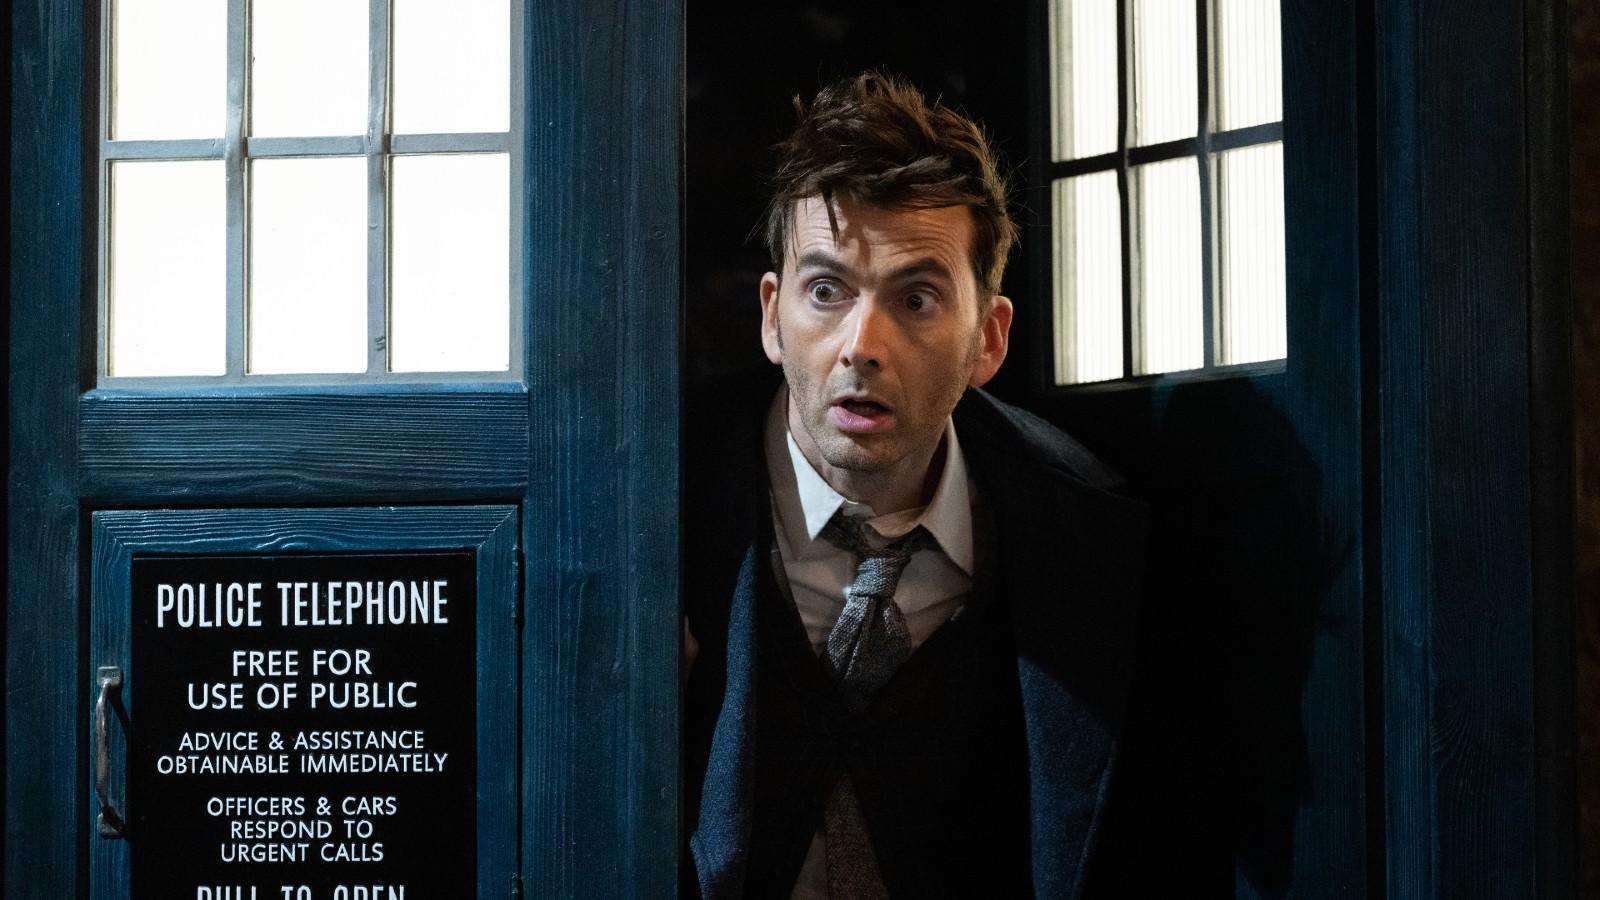 An image of David Tennant as the fourteenth Doctor as featured in the Doctor Who 60th anniversary specials.